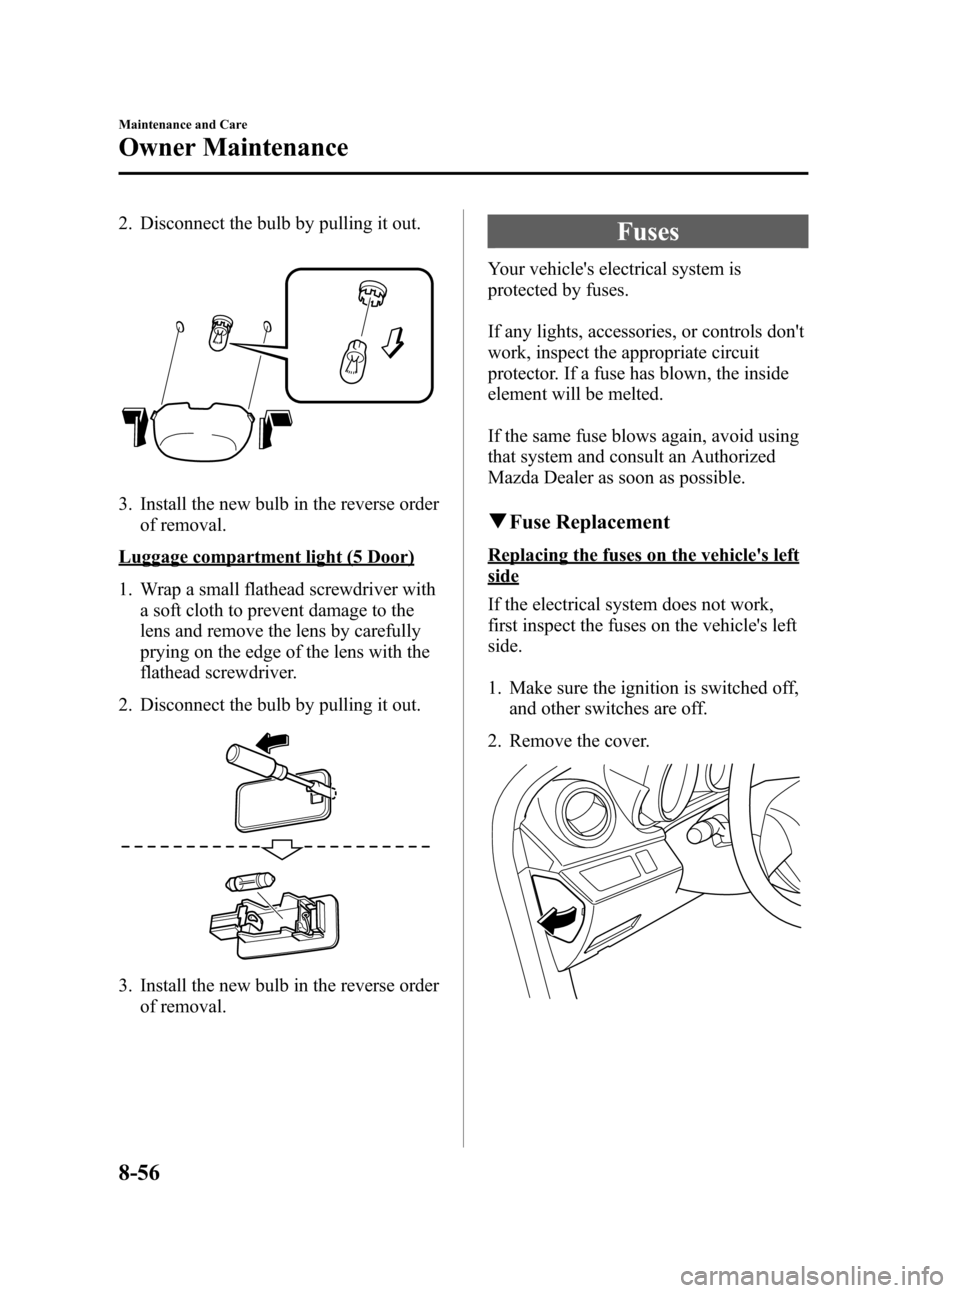 MAZDA MODEL 3 HATCHBACK 2012  Owners Manual (in English) Black plate (438,1)
2. Disconnect the bulb by pulling it out.
3. Install the new bulb in the reverse orderof removal.
Luggage compartment light (5 Door)
1. Wrap a small flathead screwdriver witha soft